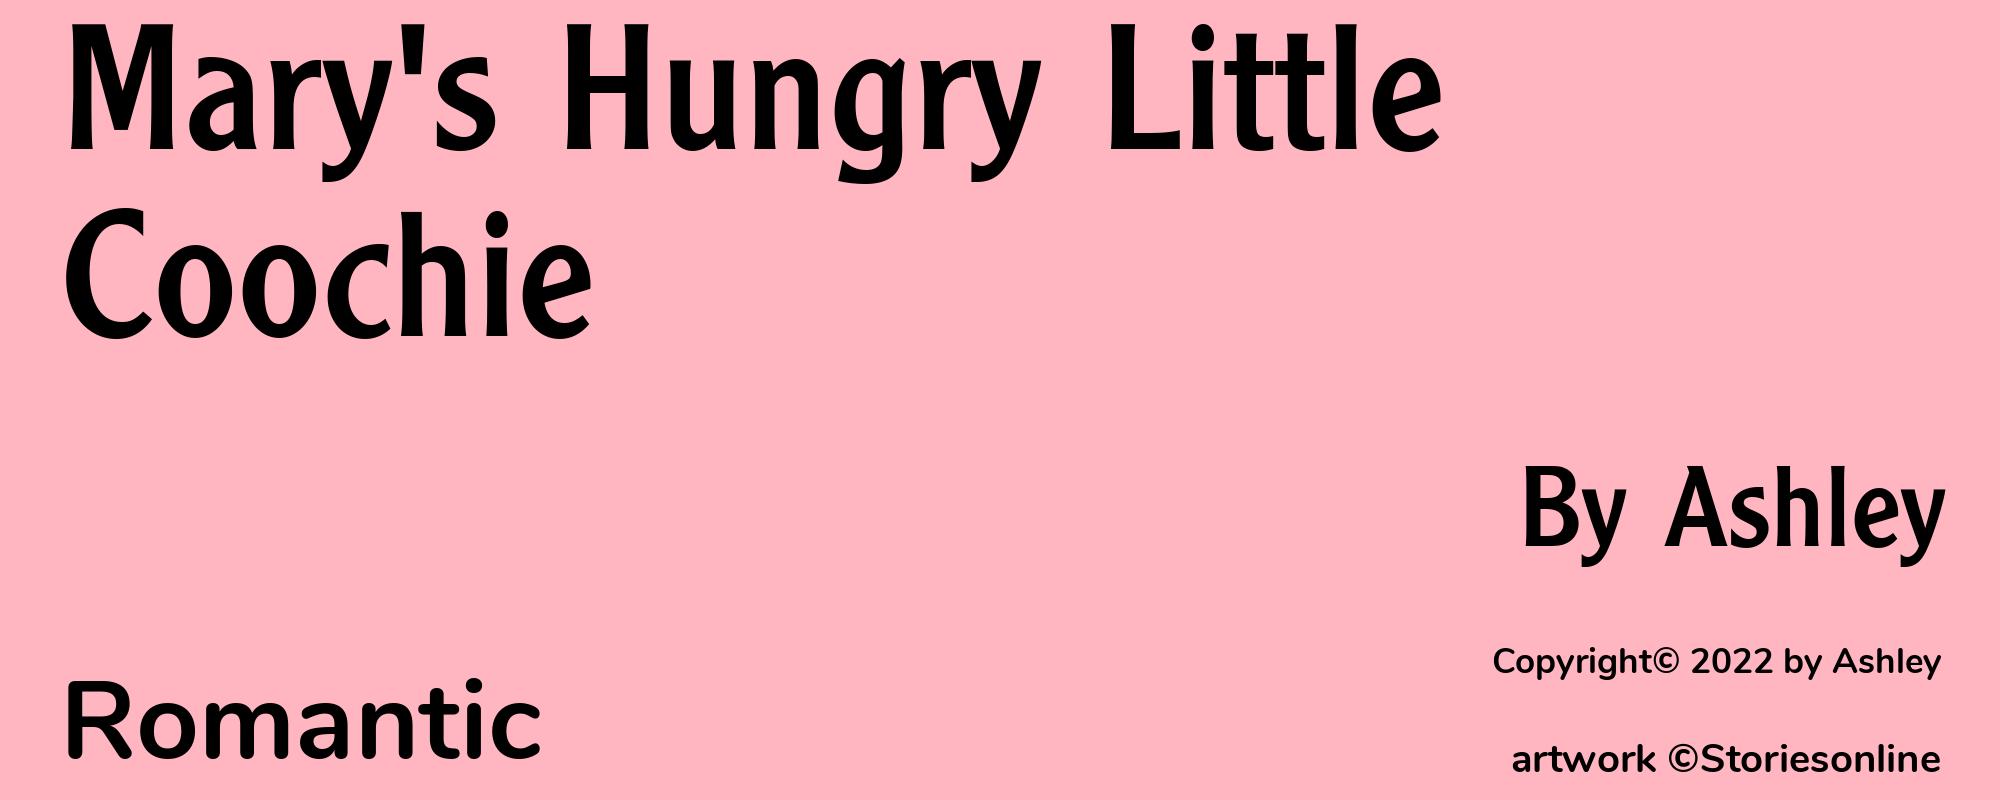 Mary's Hungry Little Coochie - Cover